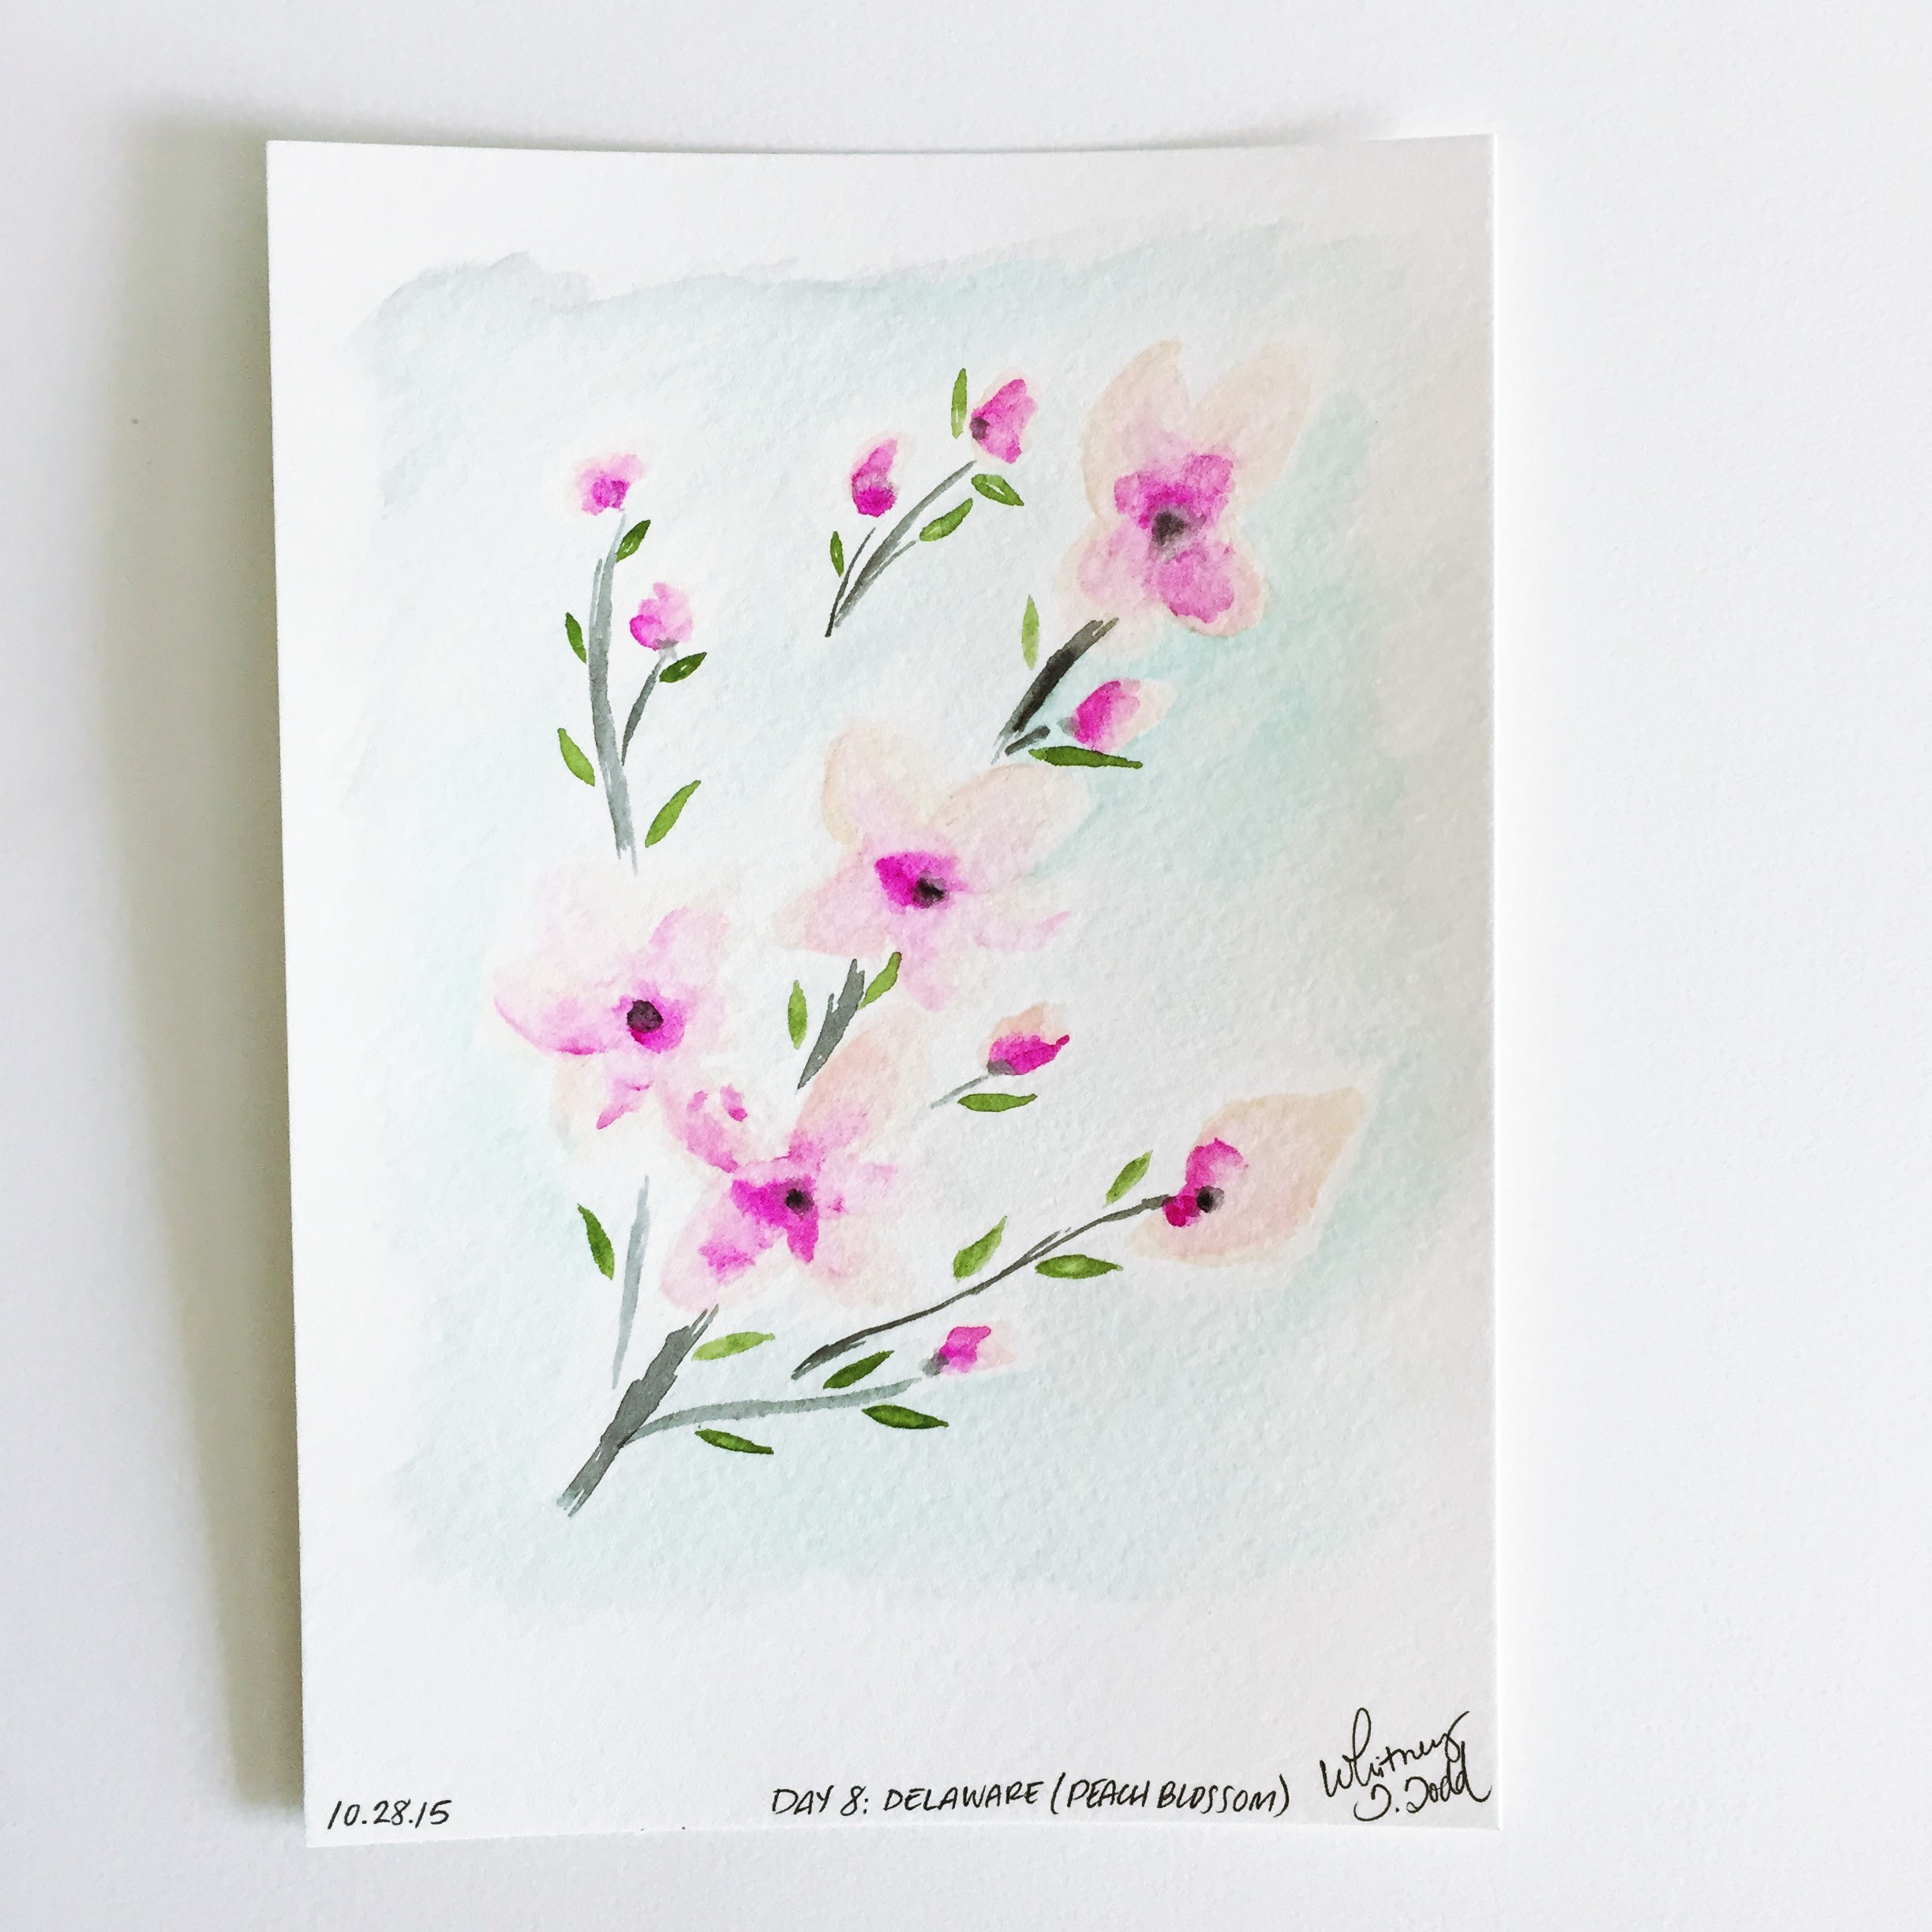 Day 8: Delaware - Peach Blossom // 50 Day State-themed Illustration and Design Challenge via Jitney's Journeys